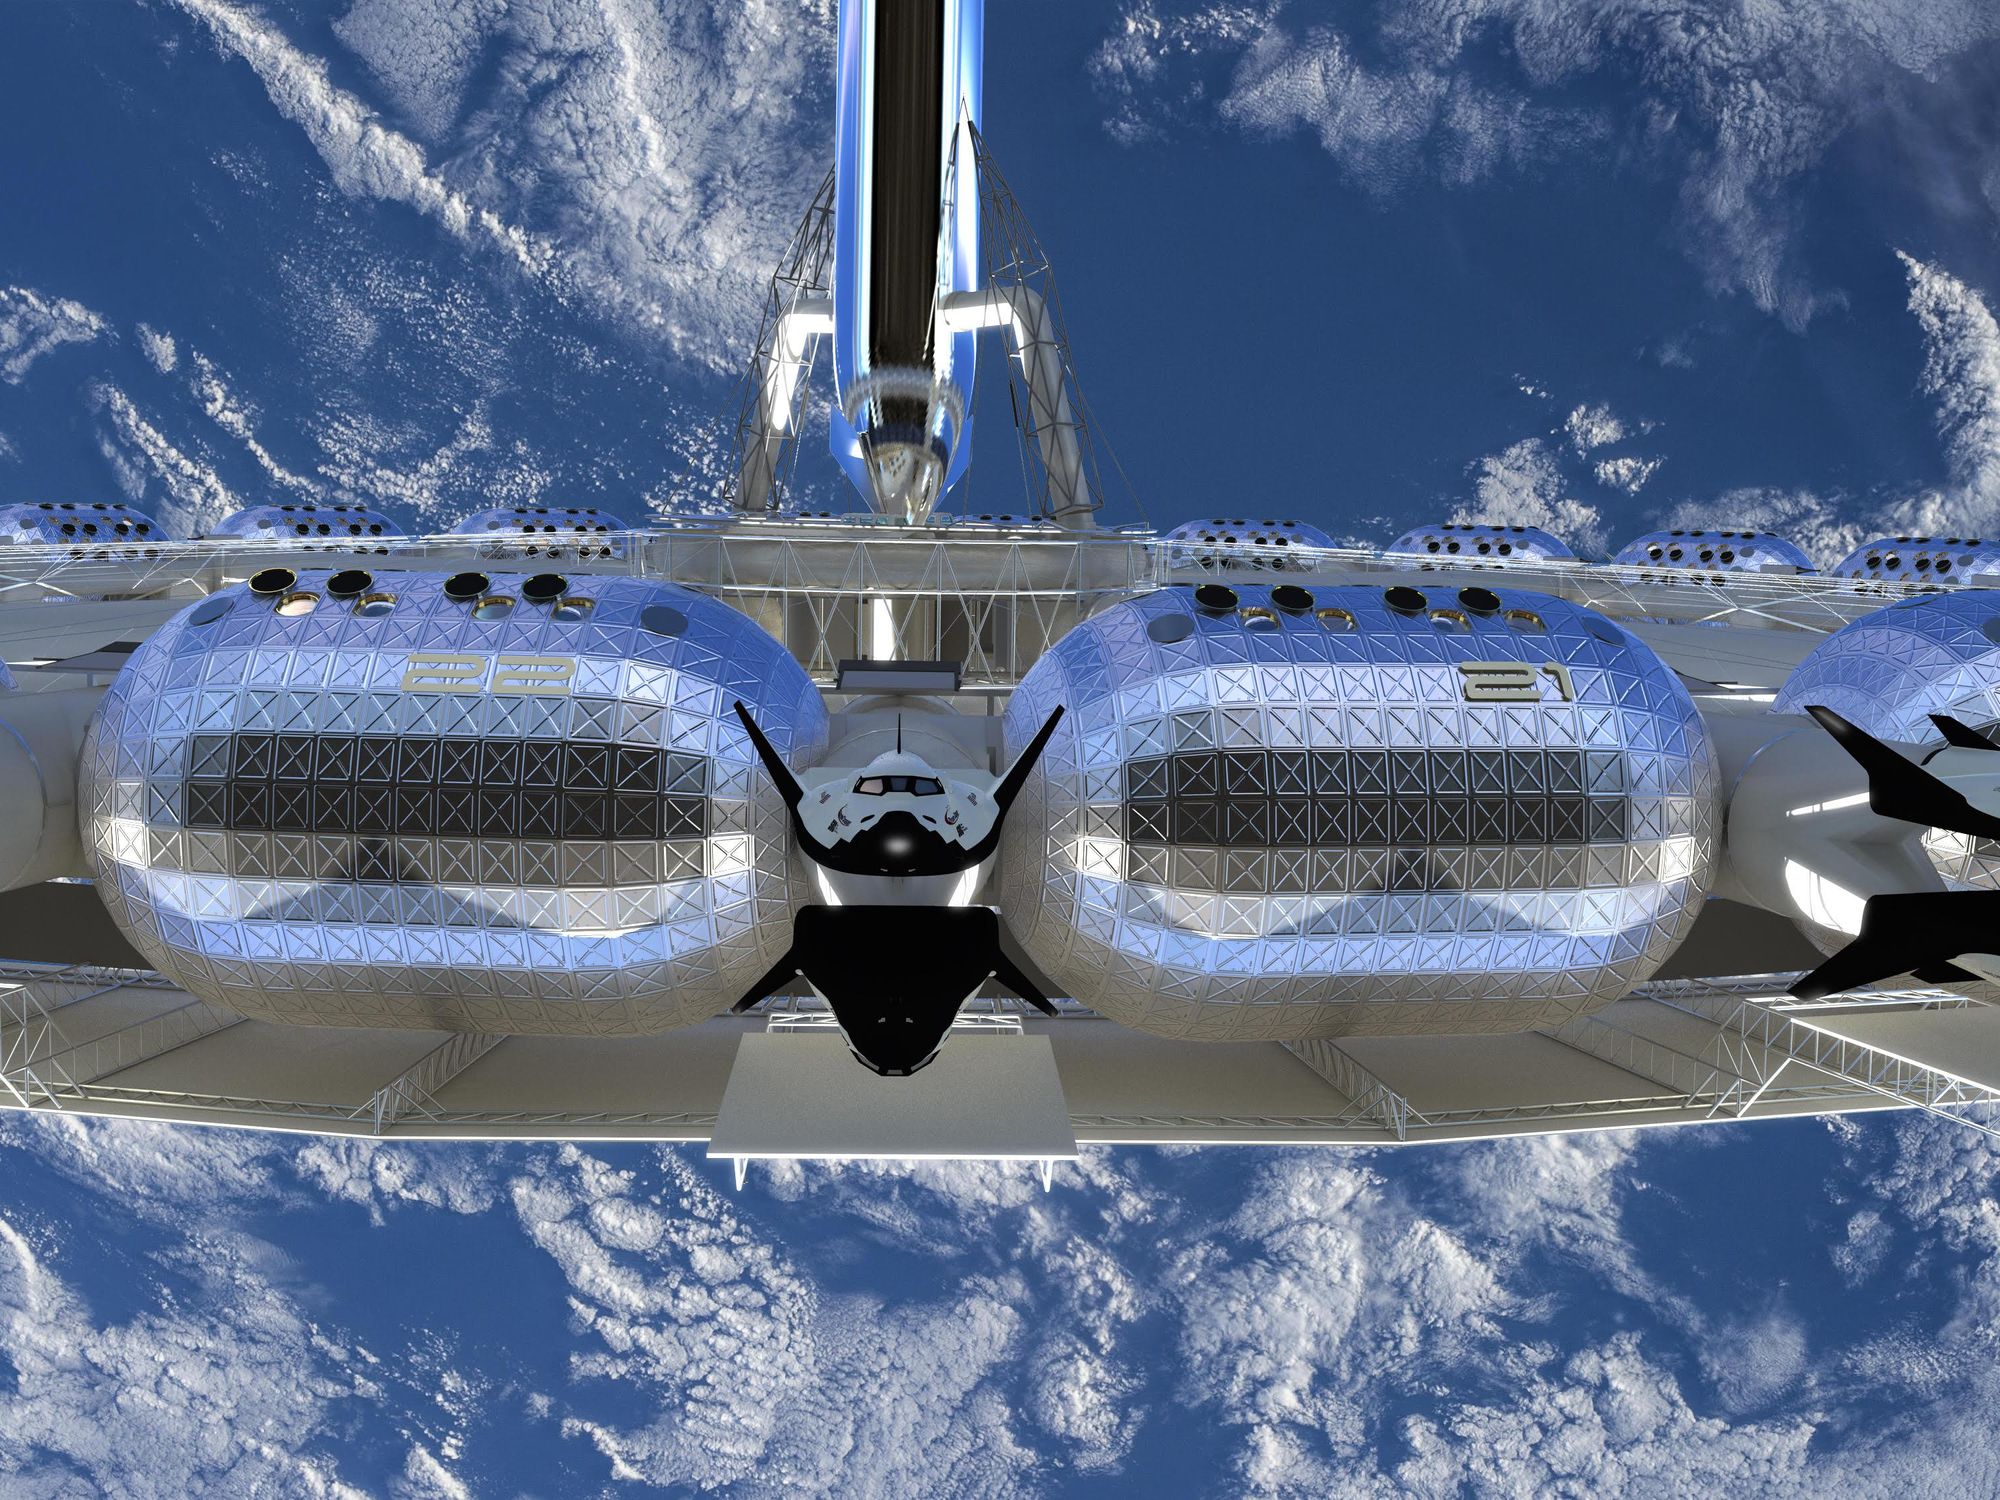 Is a Commercial Space Station Possible? These Startups Are Racing To Be the First to Try It